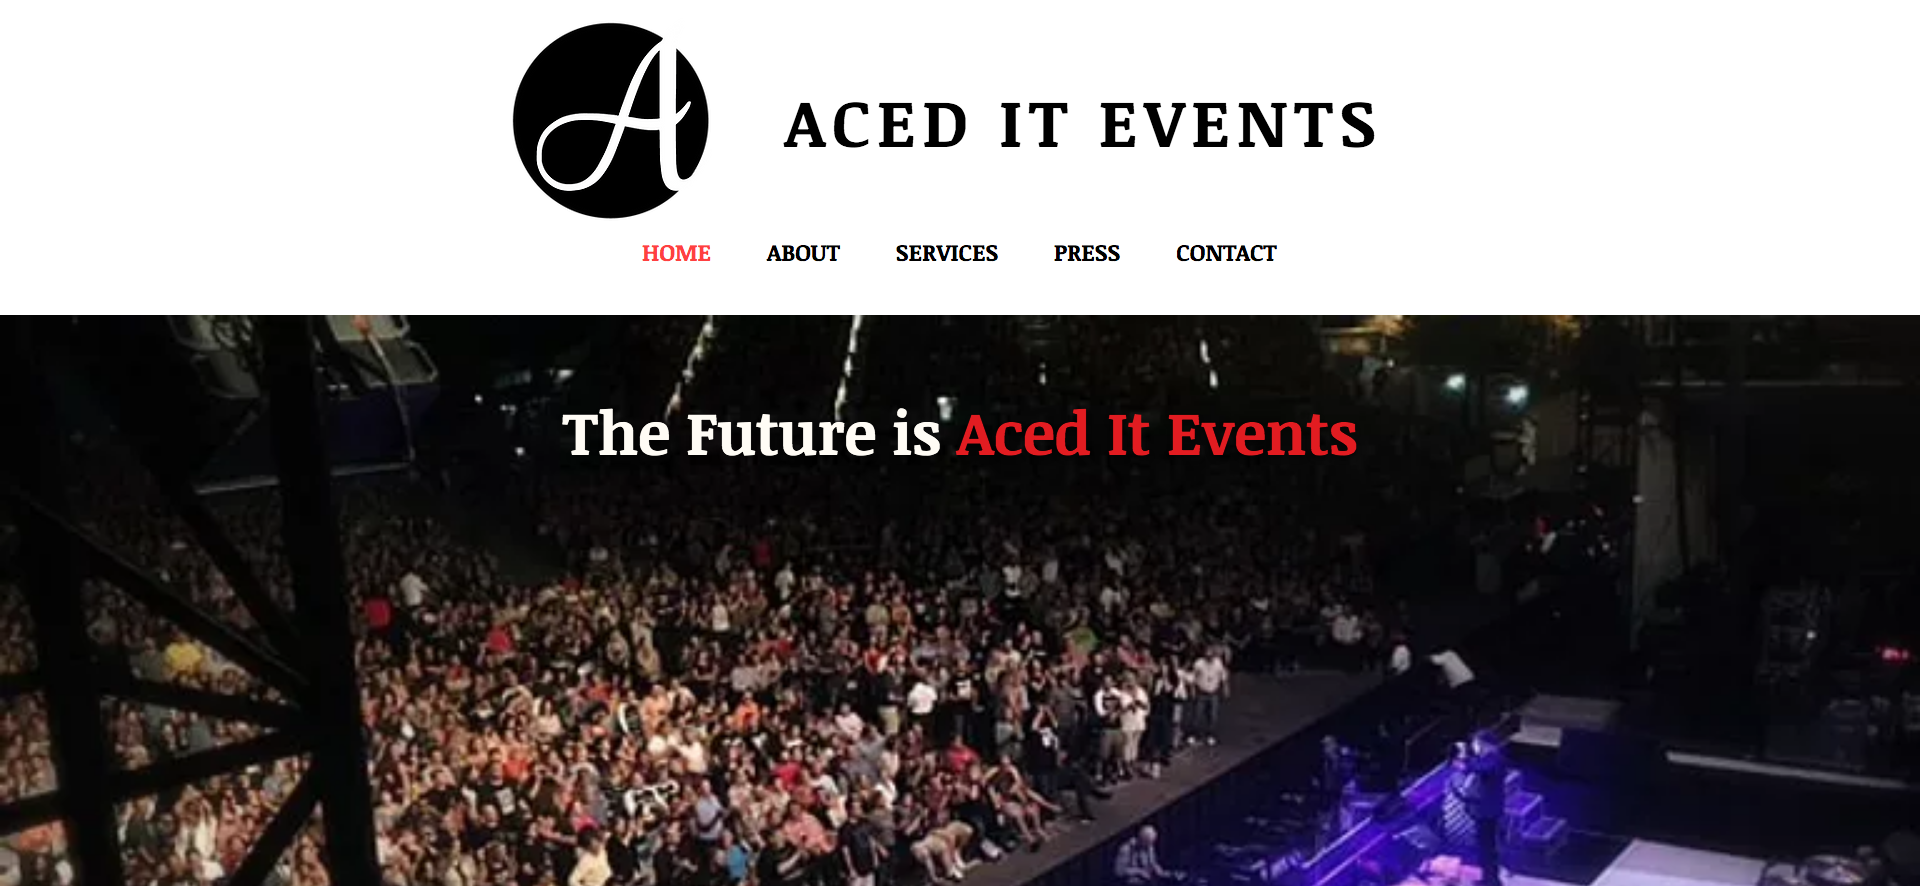 aced it events website